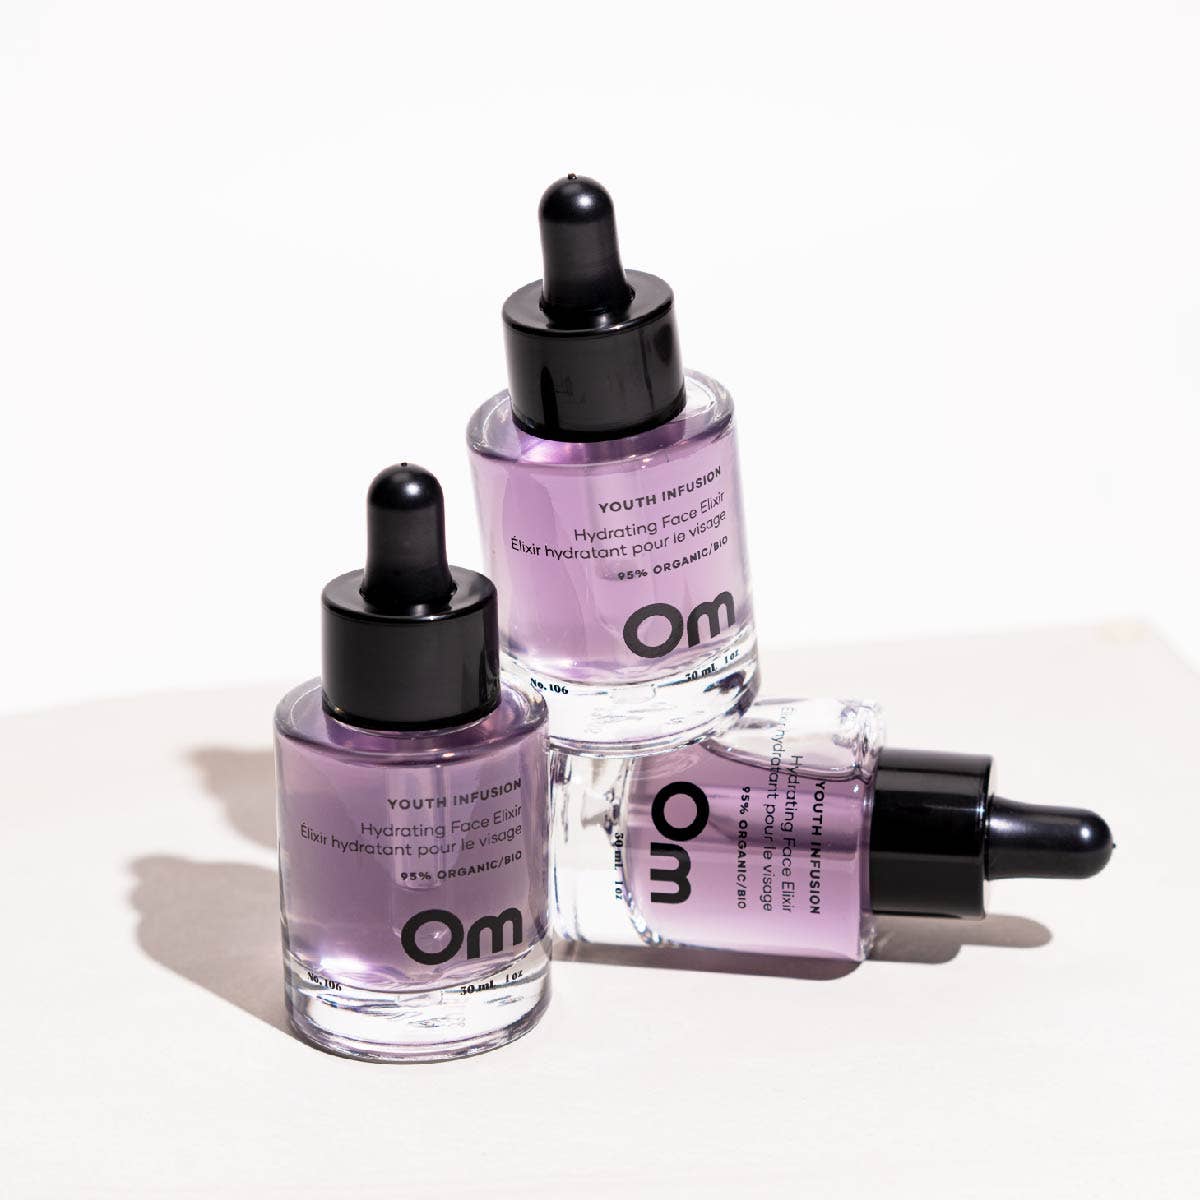 Om - Youth Infusion Hydrating Face Elixir: Full Size - 30 ml